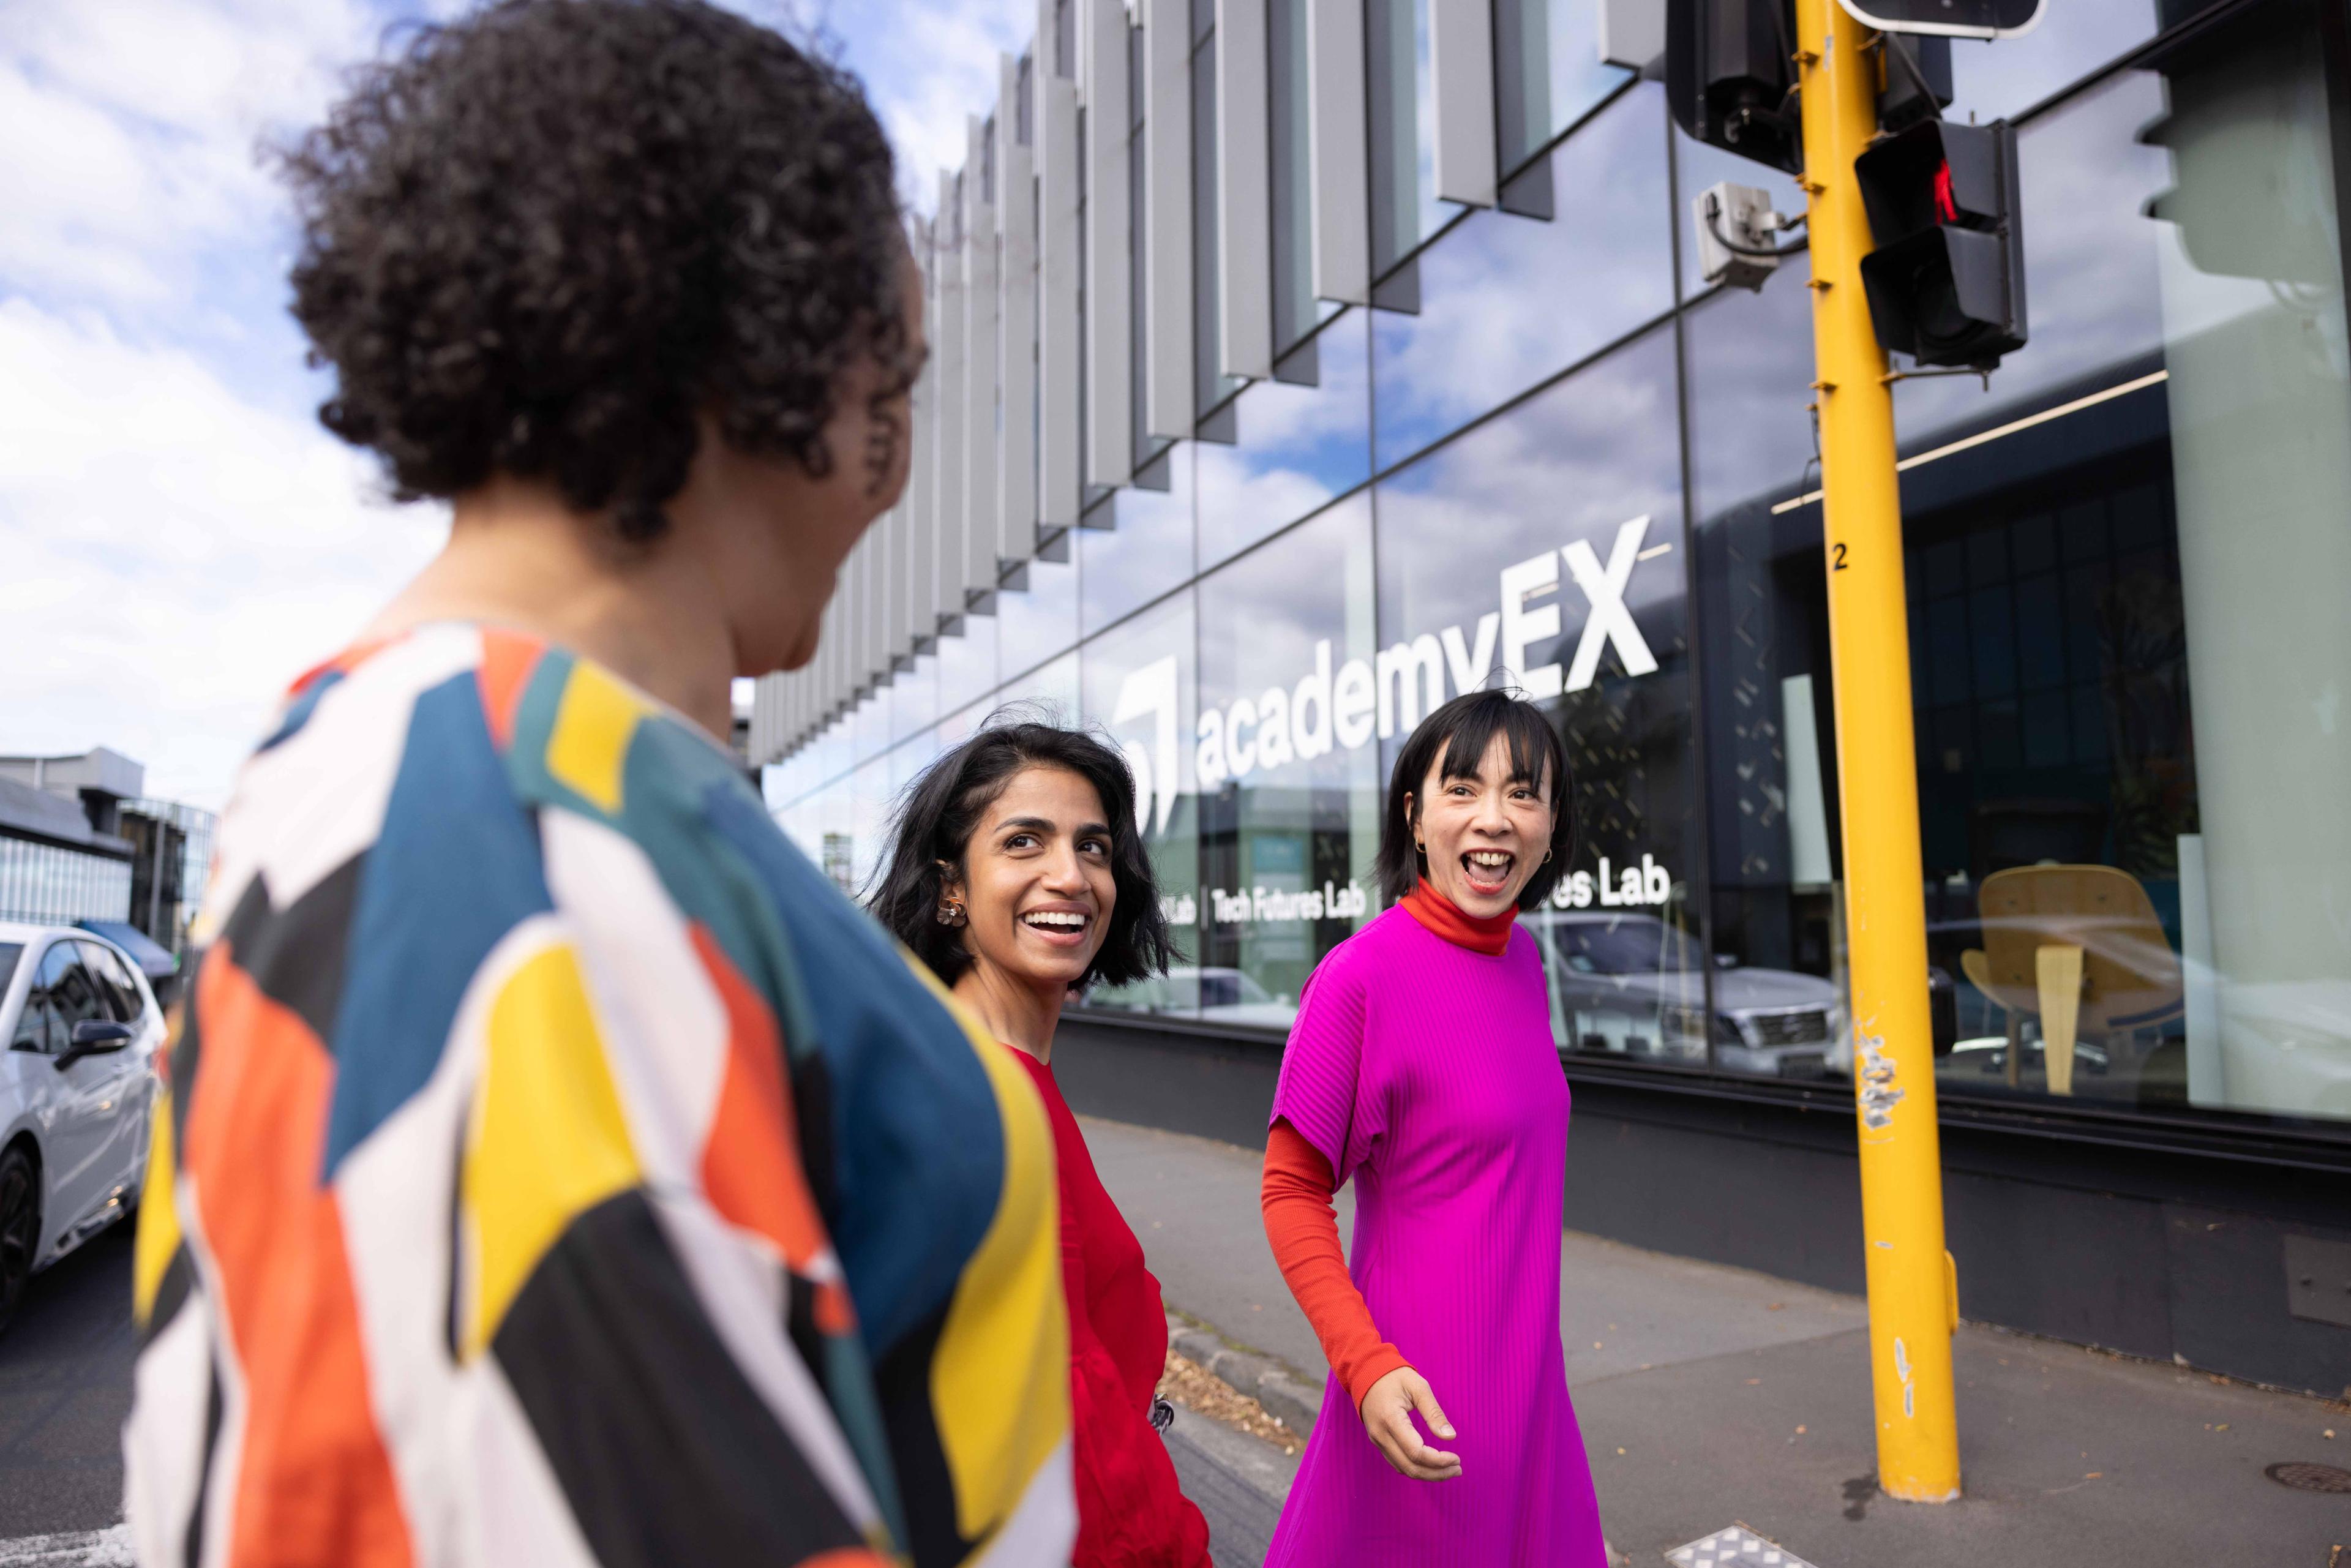 Three people are walking outside a modern building with a sign that reads "AcademyEX."